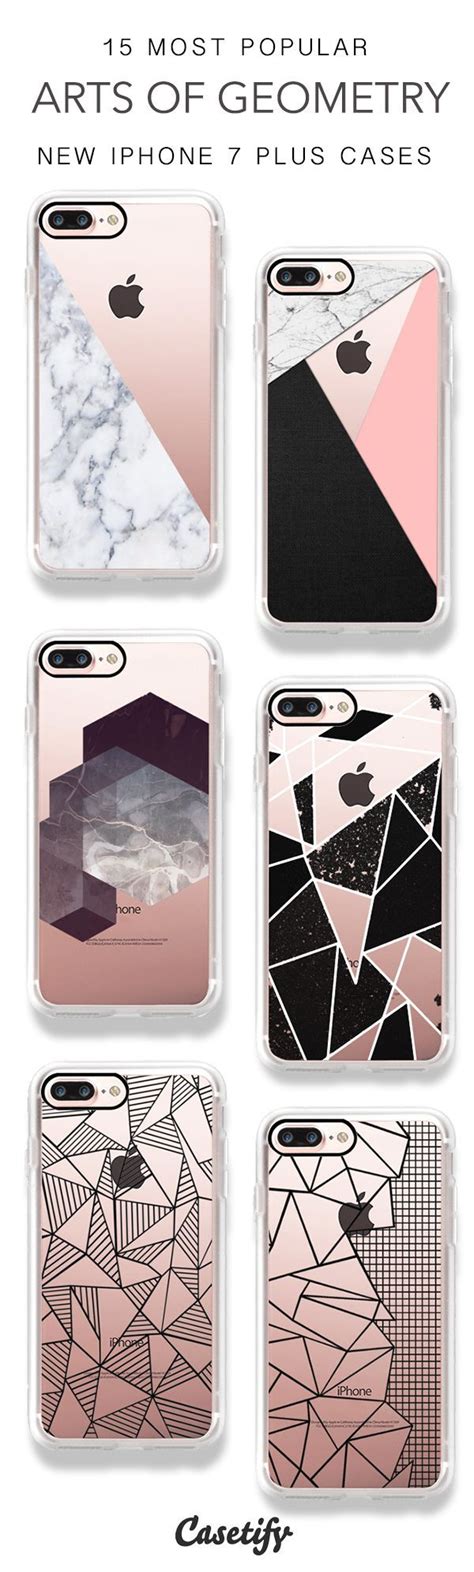 Four Iphone Cases With Different Geometric Designs On Them All In